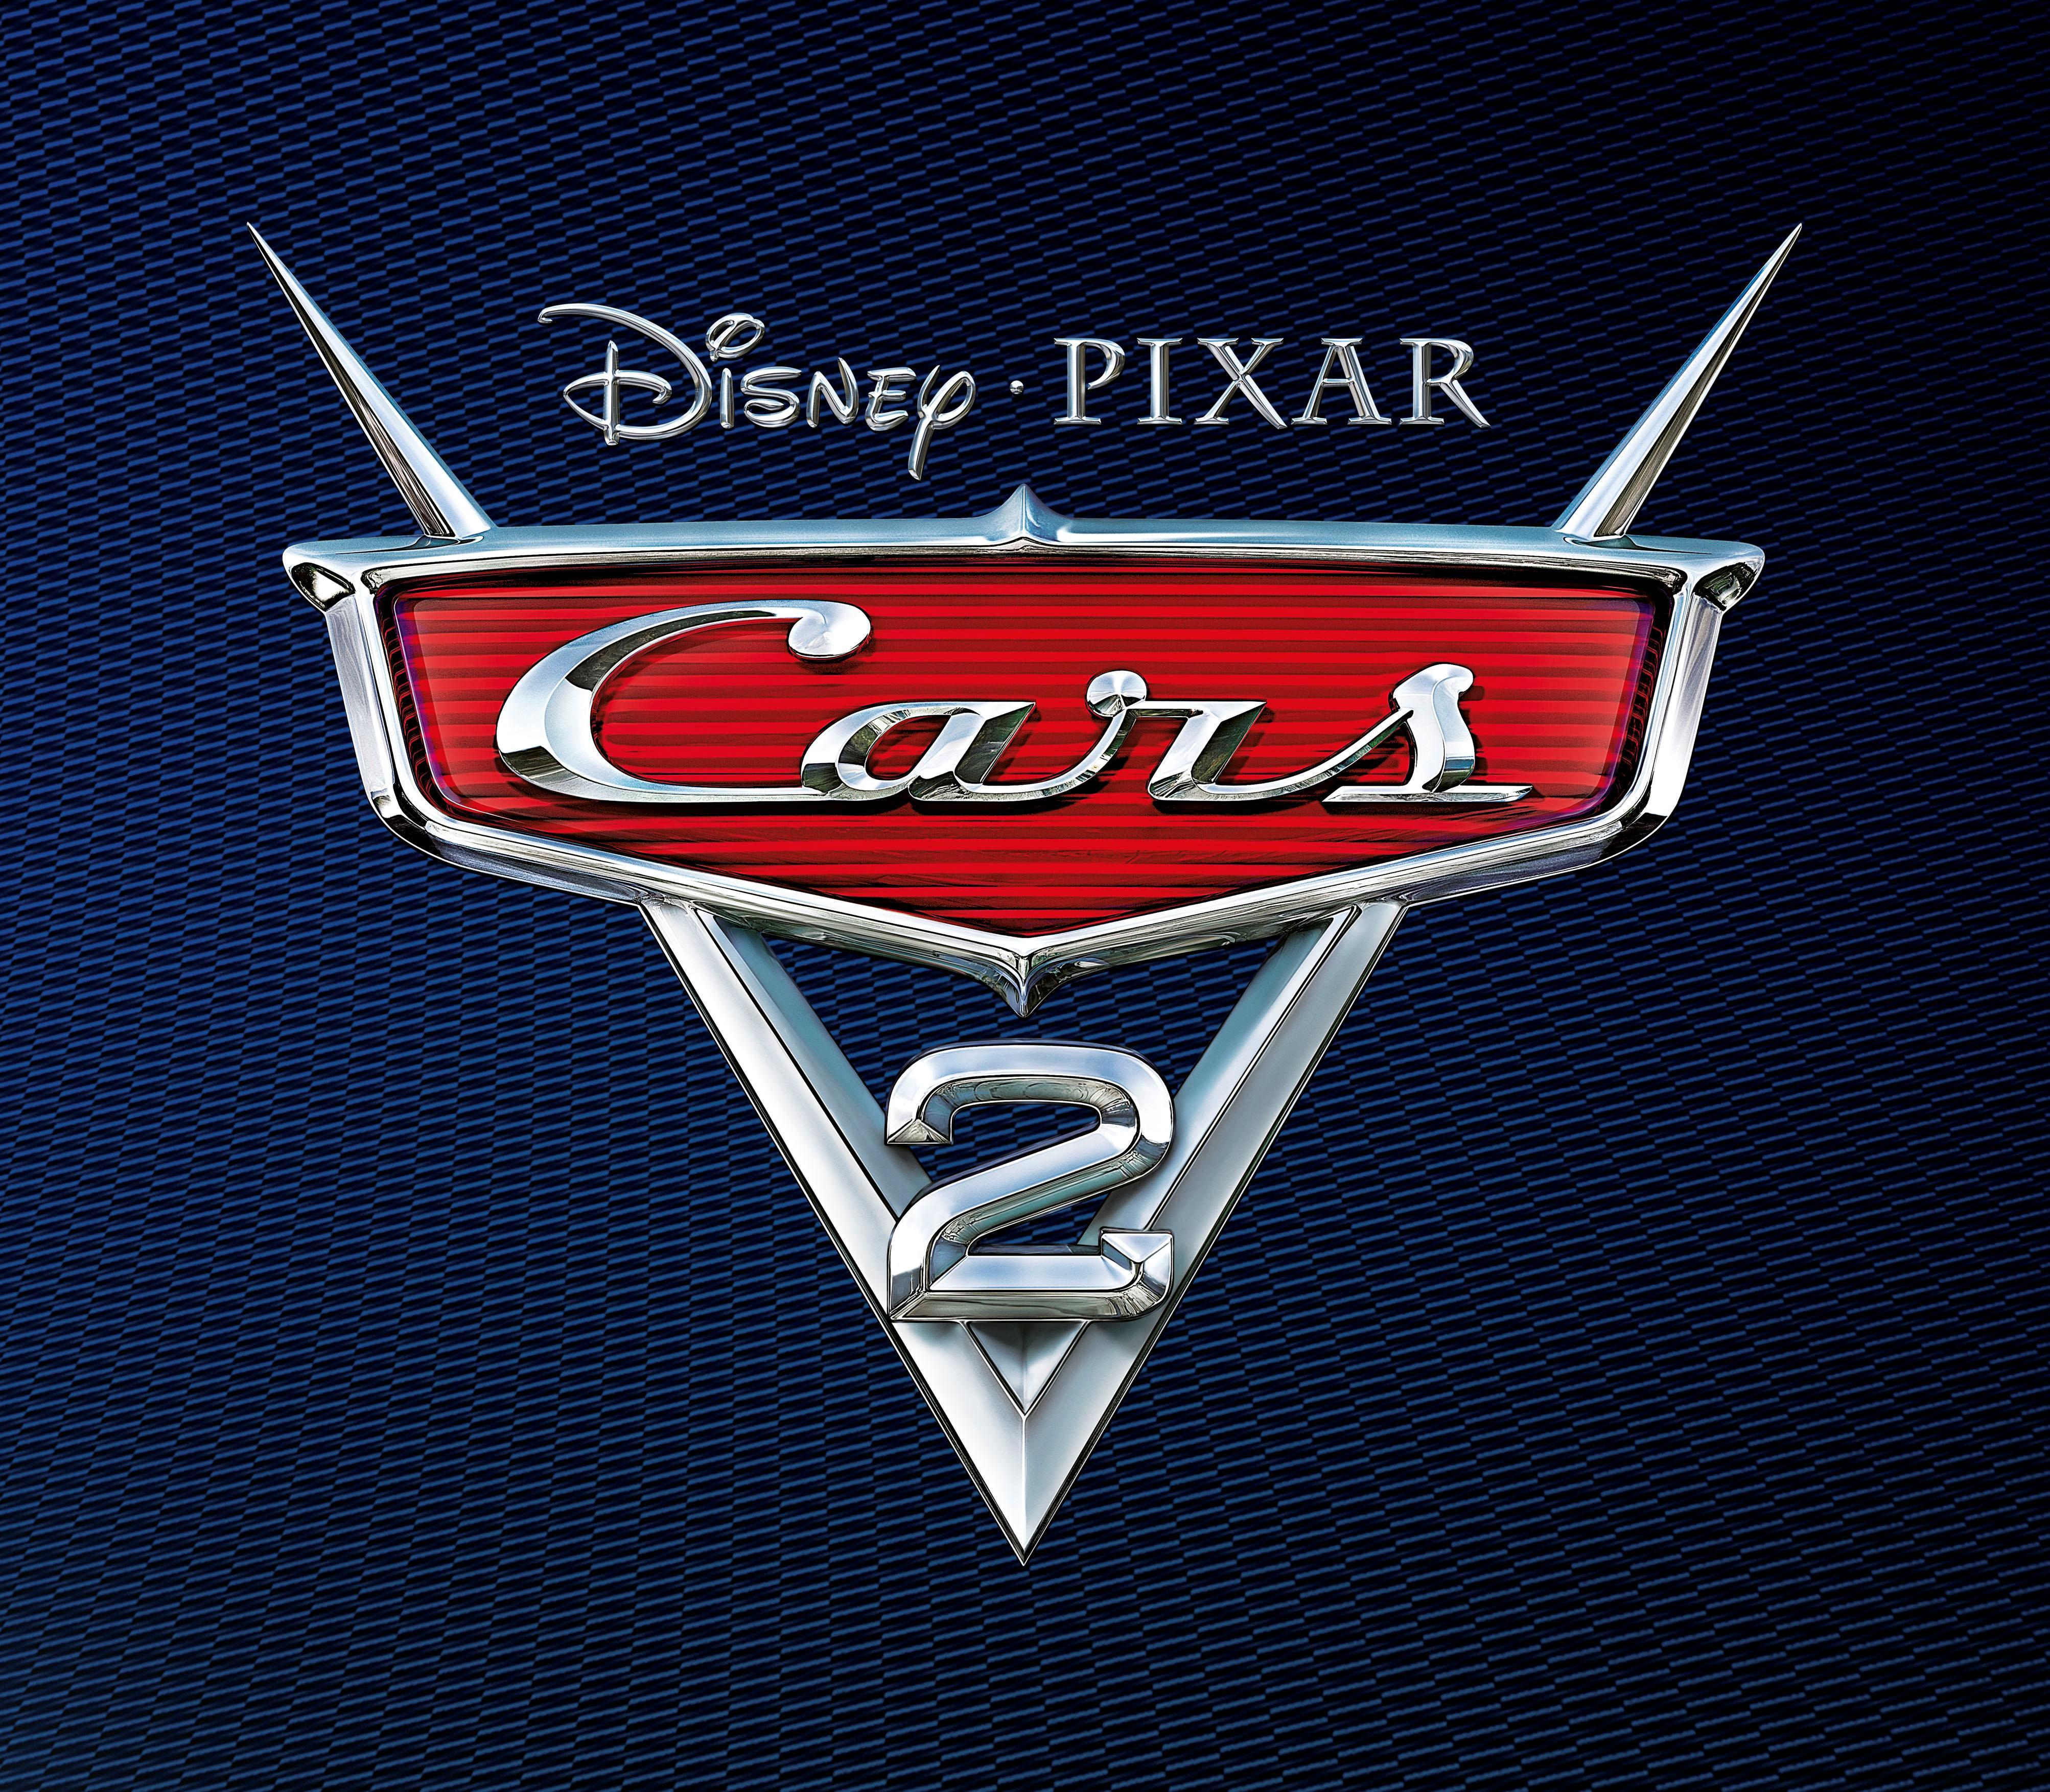 Cars 2 Movie Logo - Nuffnang Singapore. Asia Pacific's First Blog Advertising Community